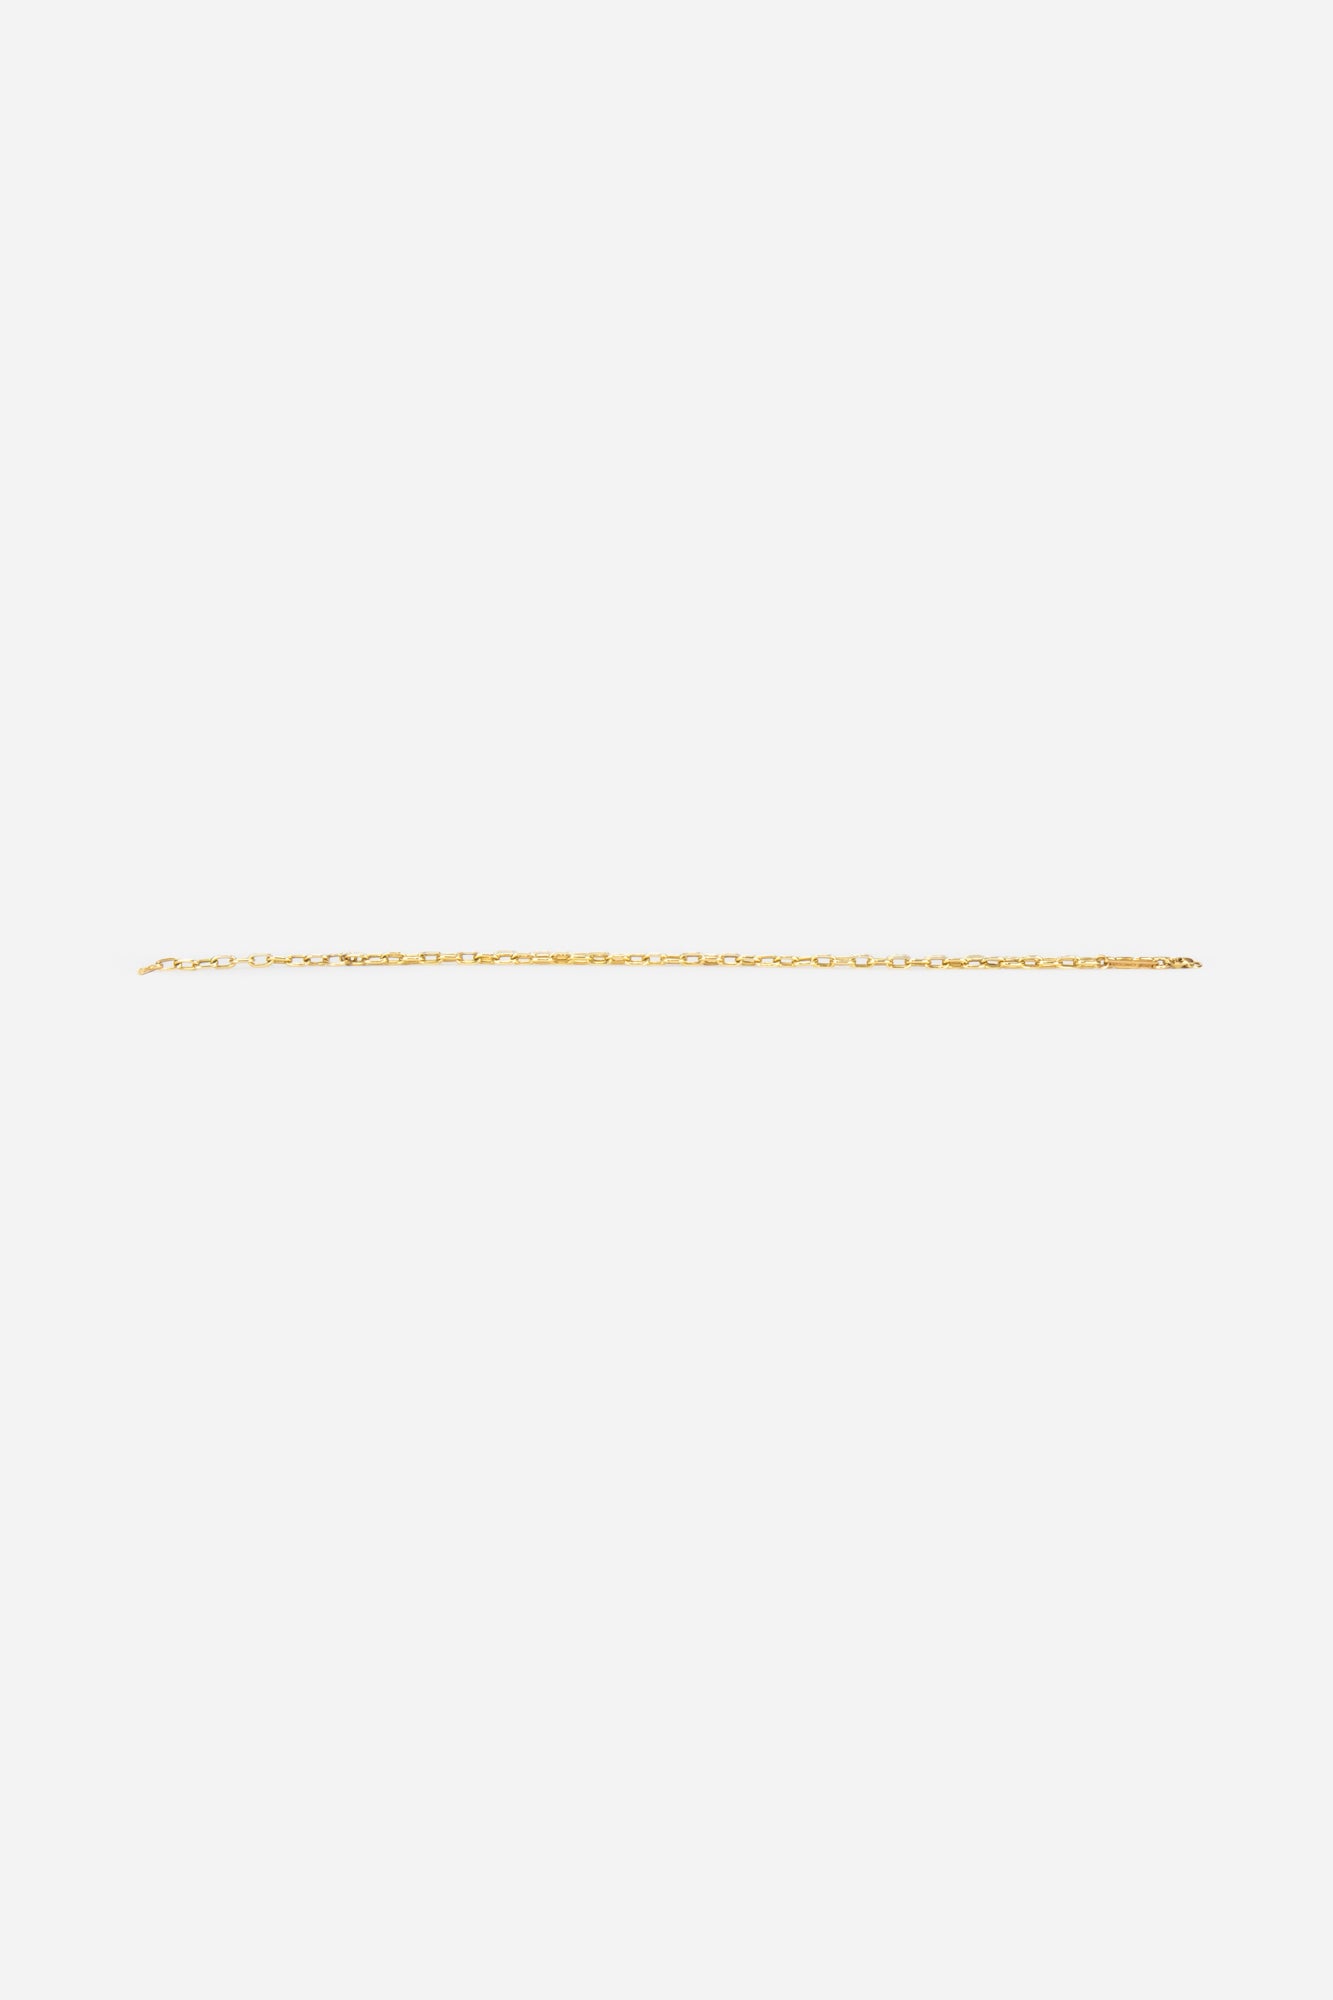 14k Gold Oval Link Chain Faux Toggle Lariat Necklace